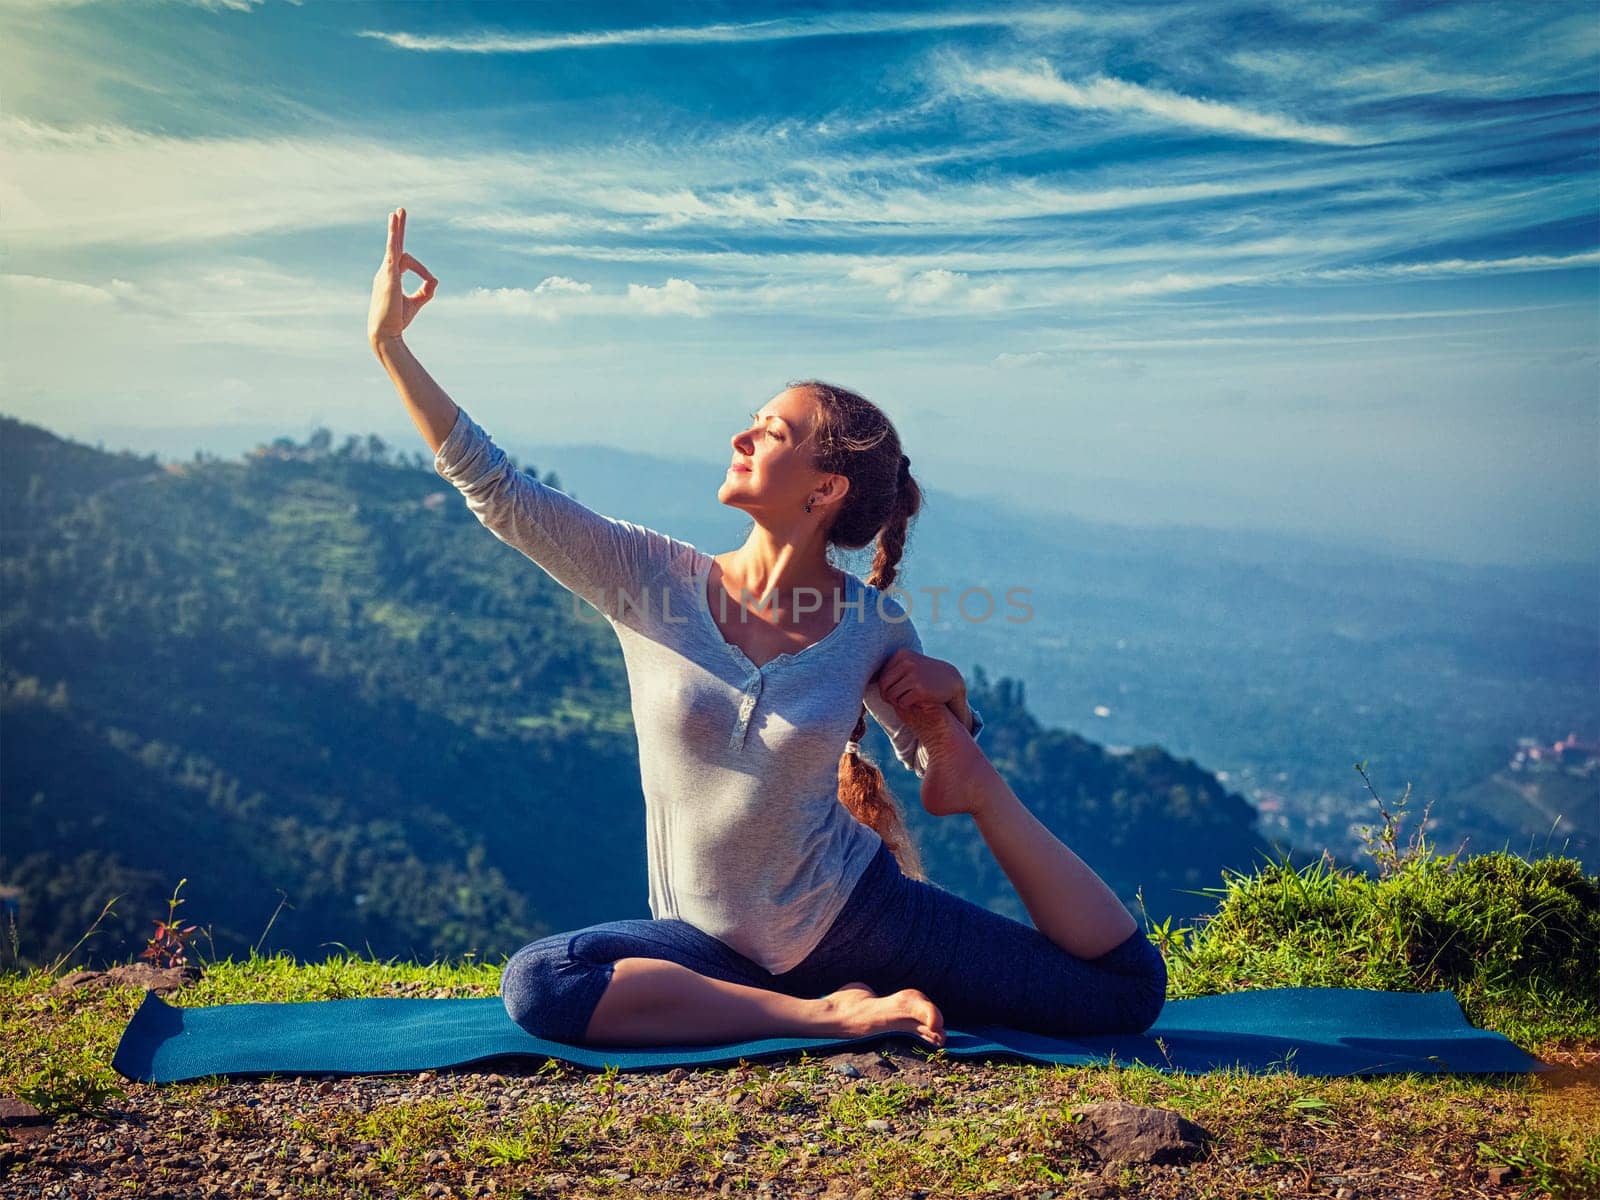 Sorty fit woman doing yoga asana outdoors in mountains by dimol